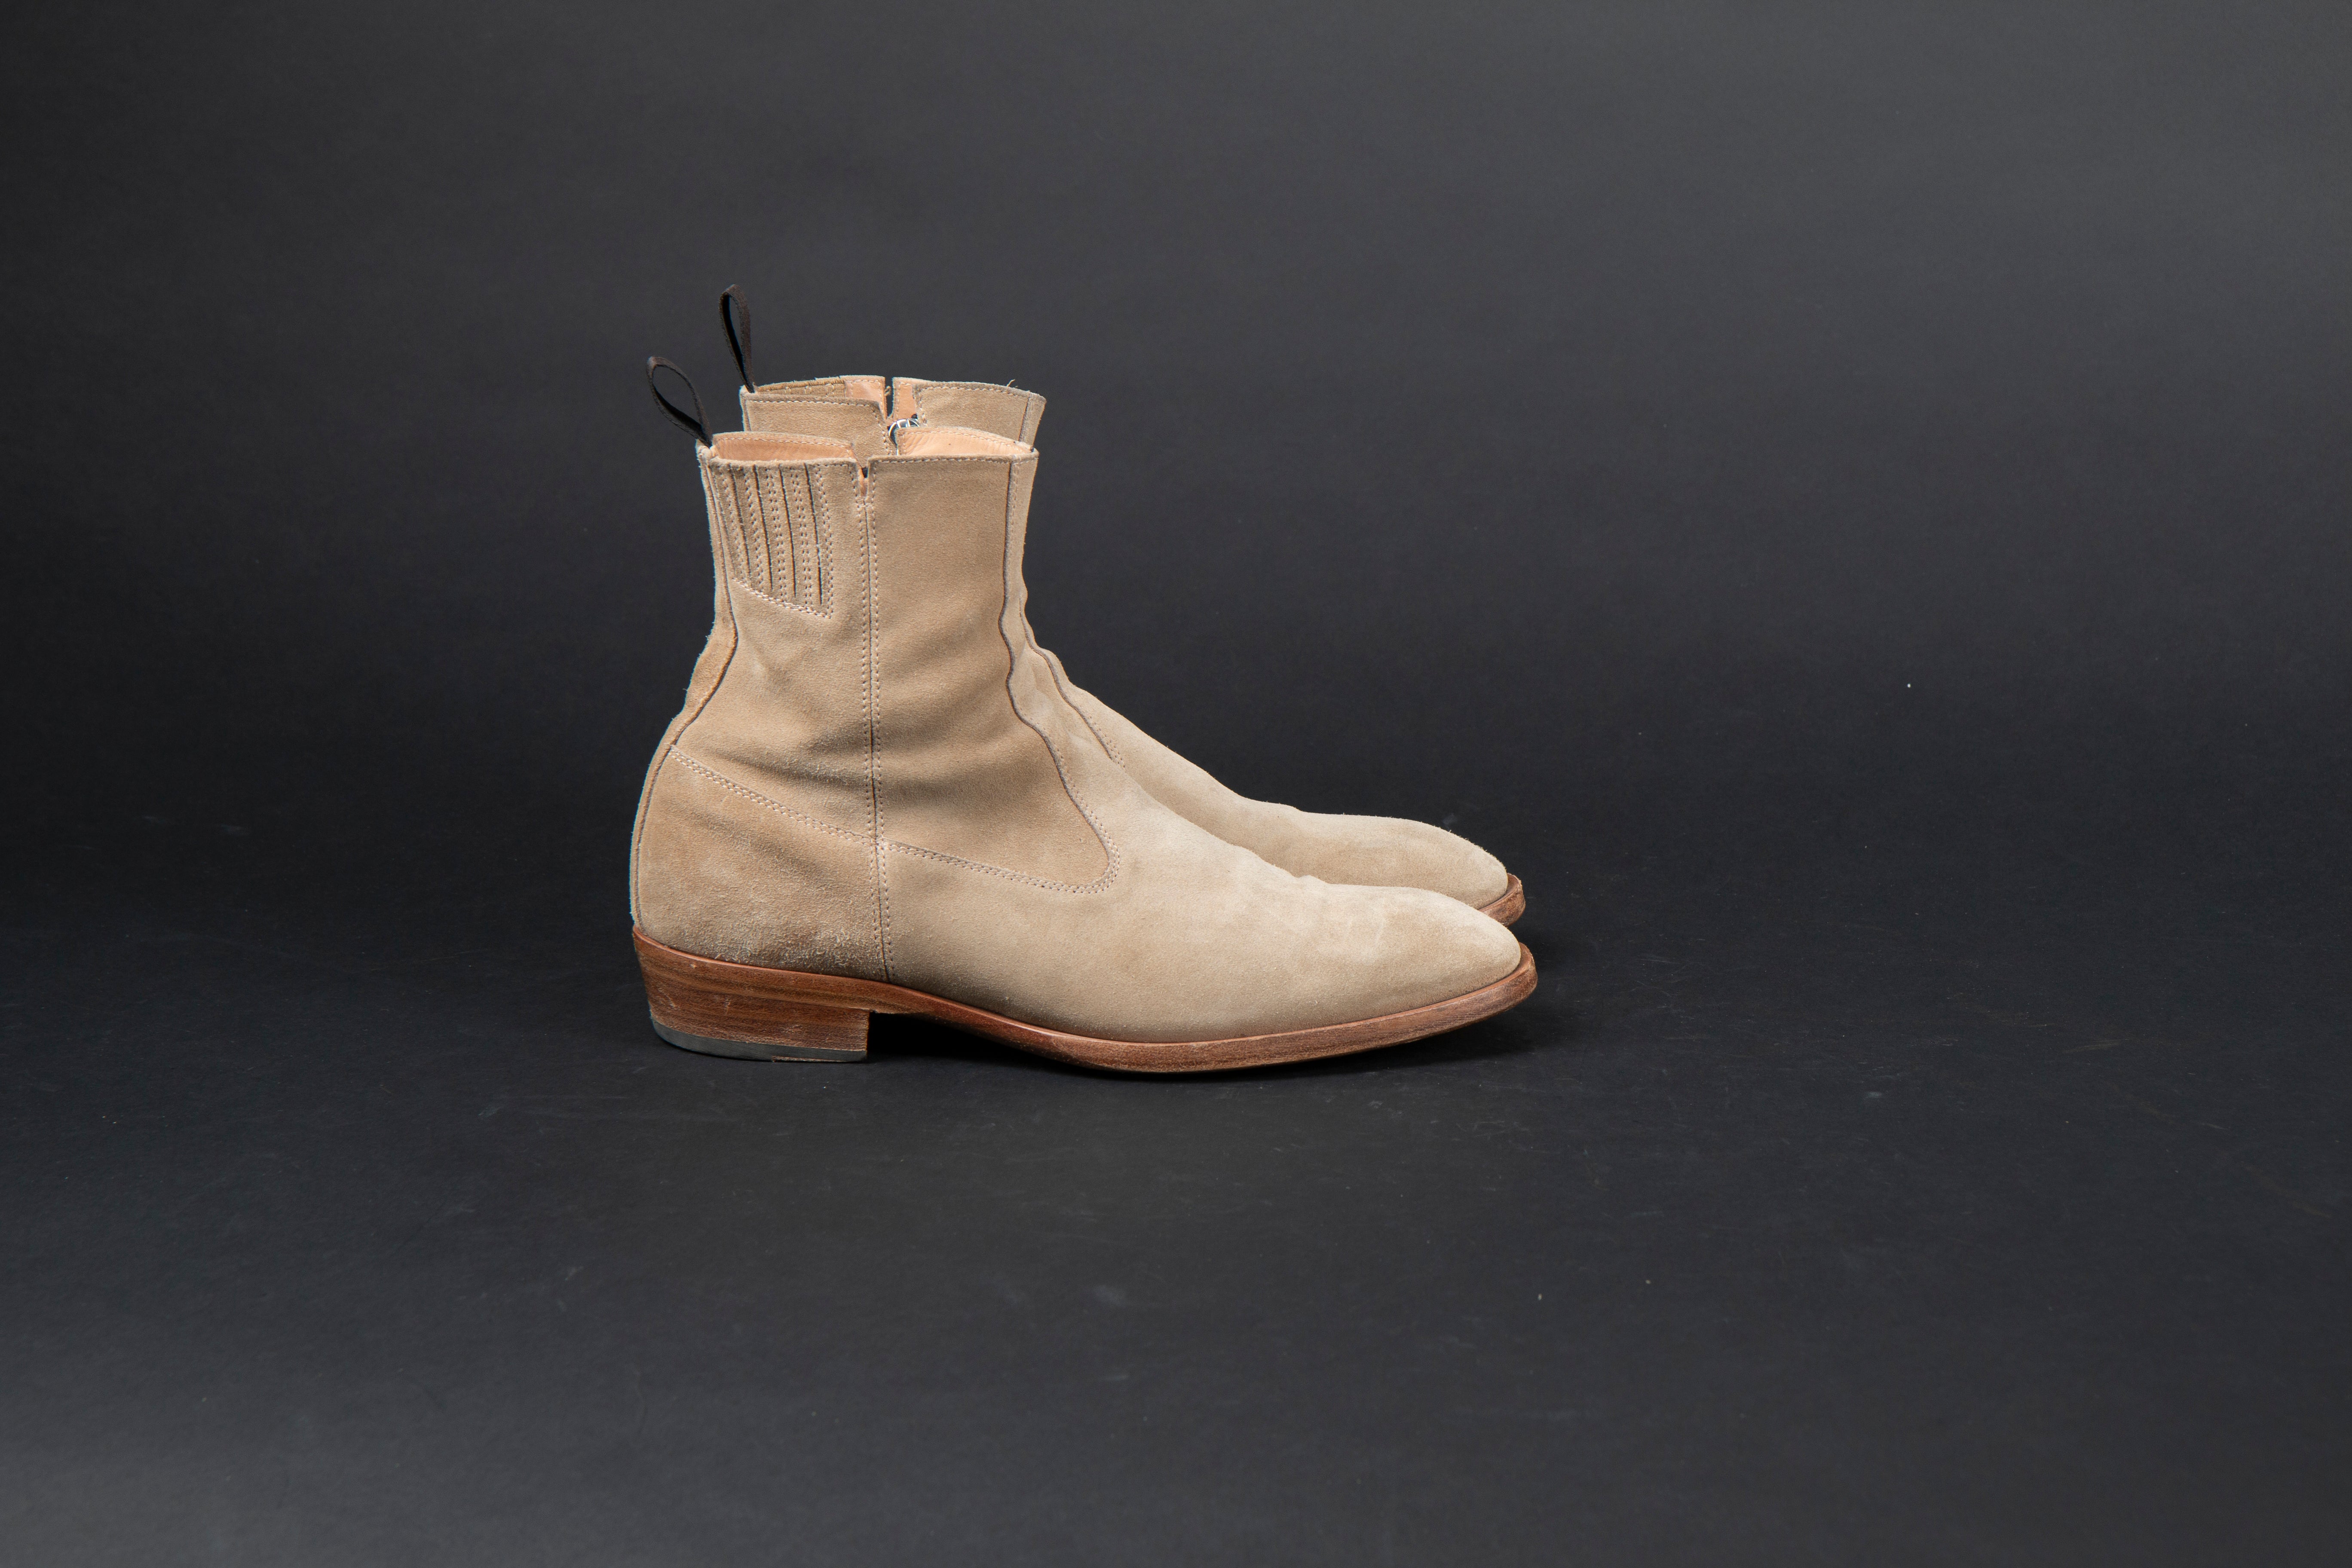 Re-used Hellstrom Suede Sand, size 43